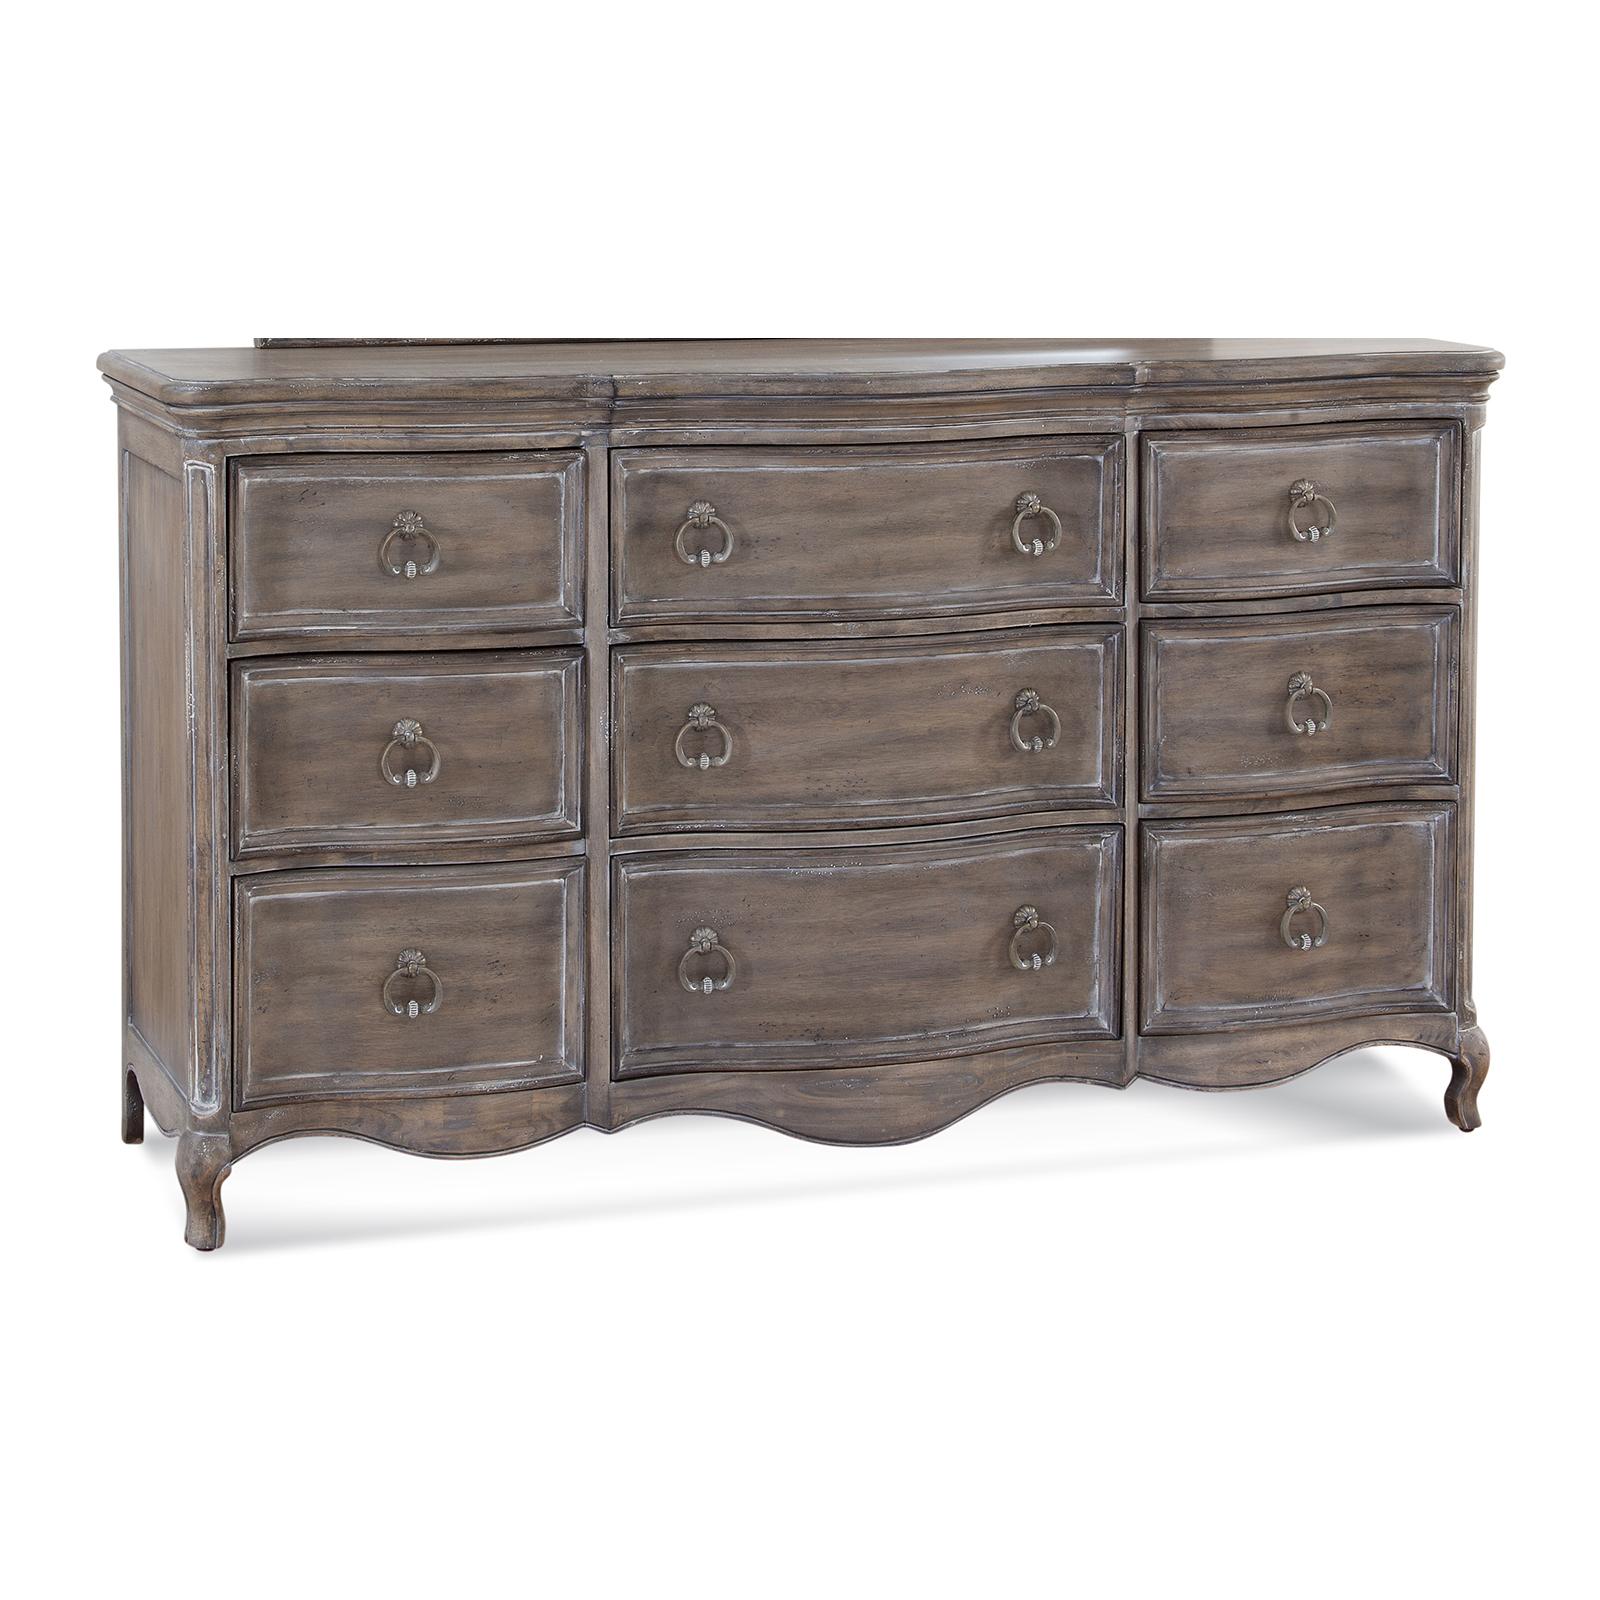 Classic, Traditional Dresser 1575-290 1575-290 in Antique, Gray 